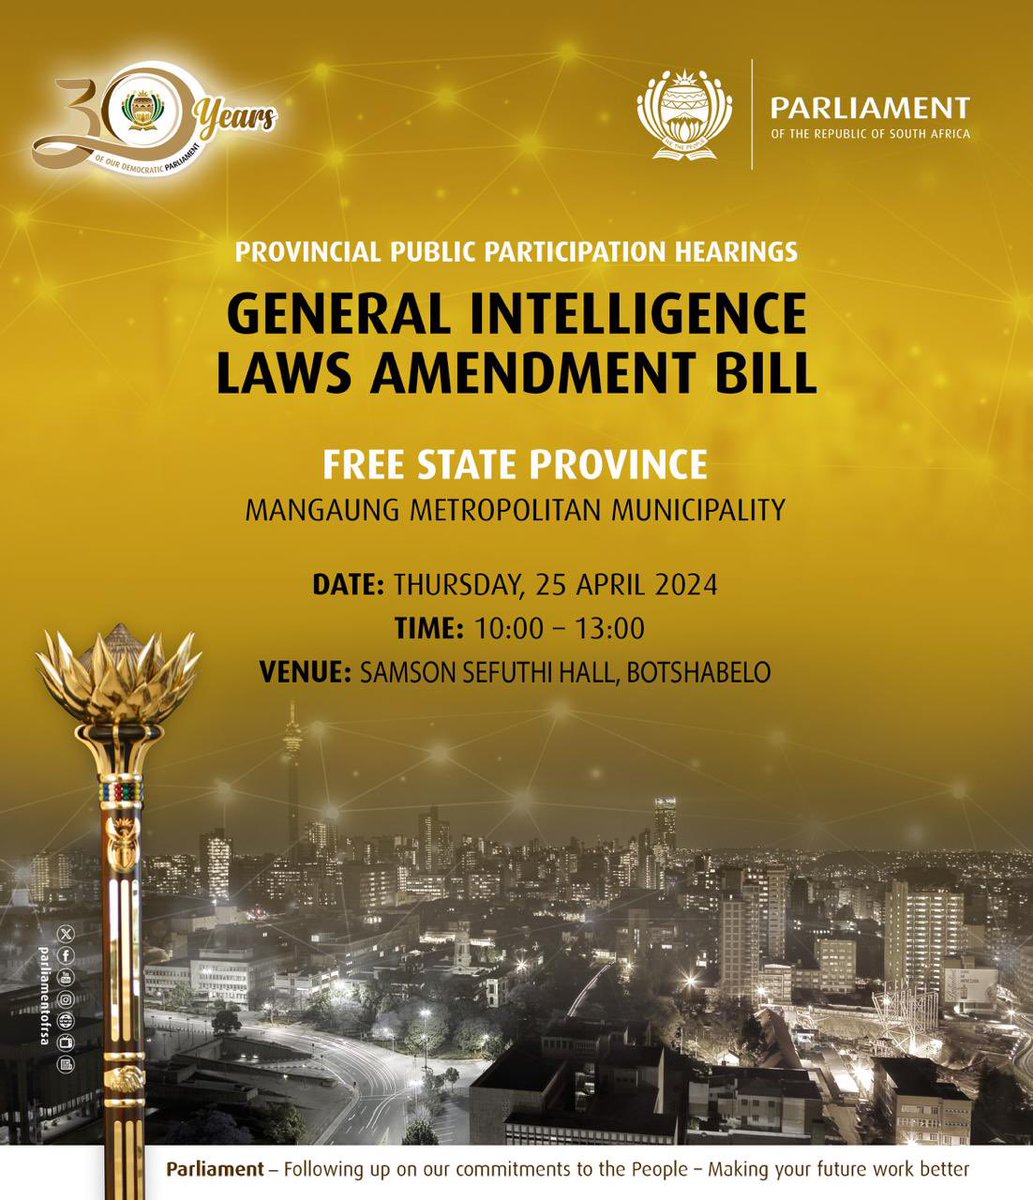 The Ad Hoc Committee on the General Intelligence Laws Amendment Bill will tomorrow conduct a public hearing in Bloemfontein in the Free State province. #GILAB